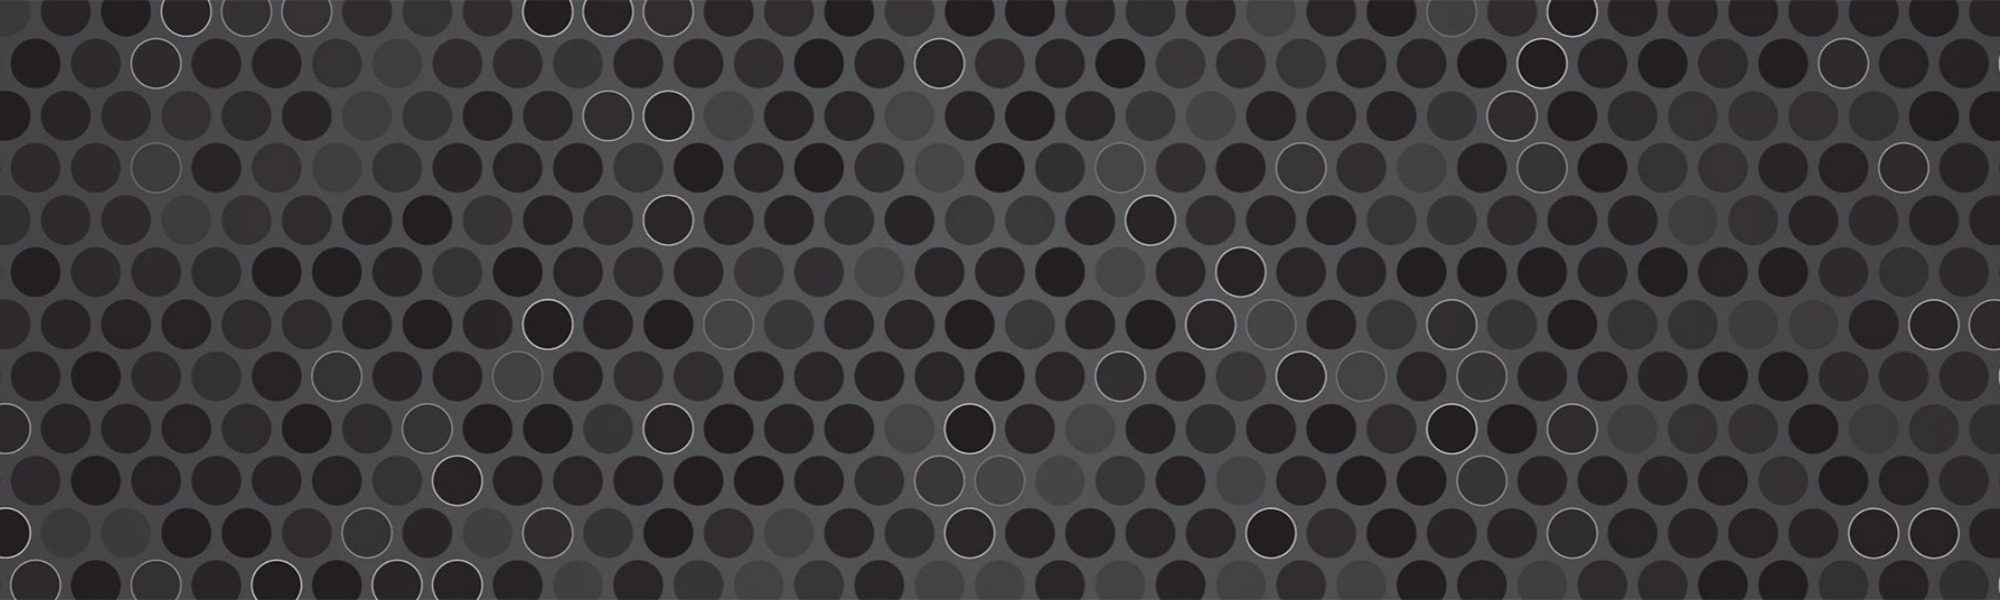 An abstract pattern of overlapping circles in shades of gray, creating a metallic mesh-like texture.